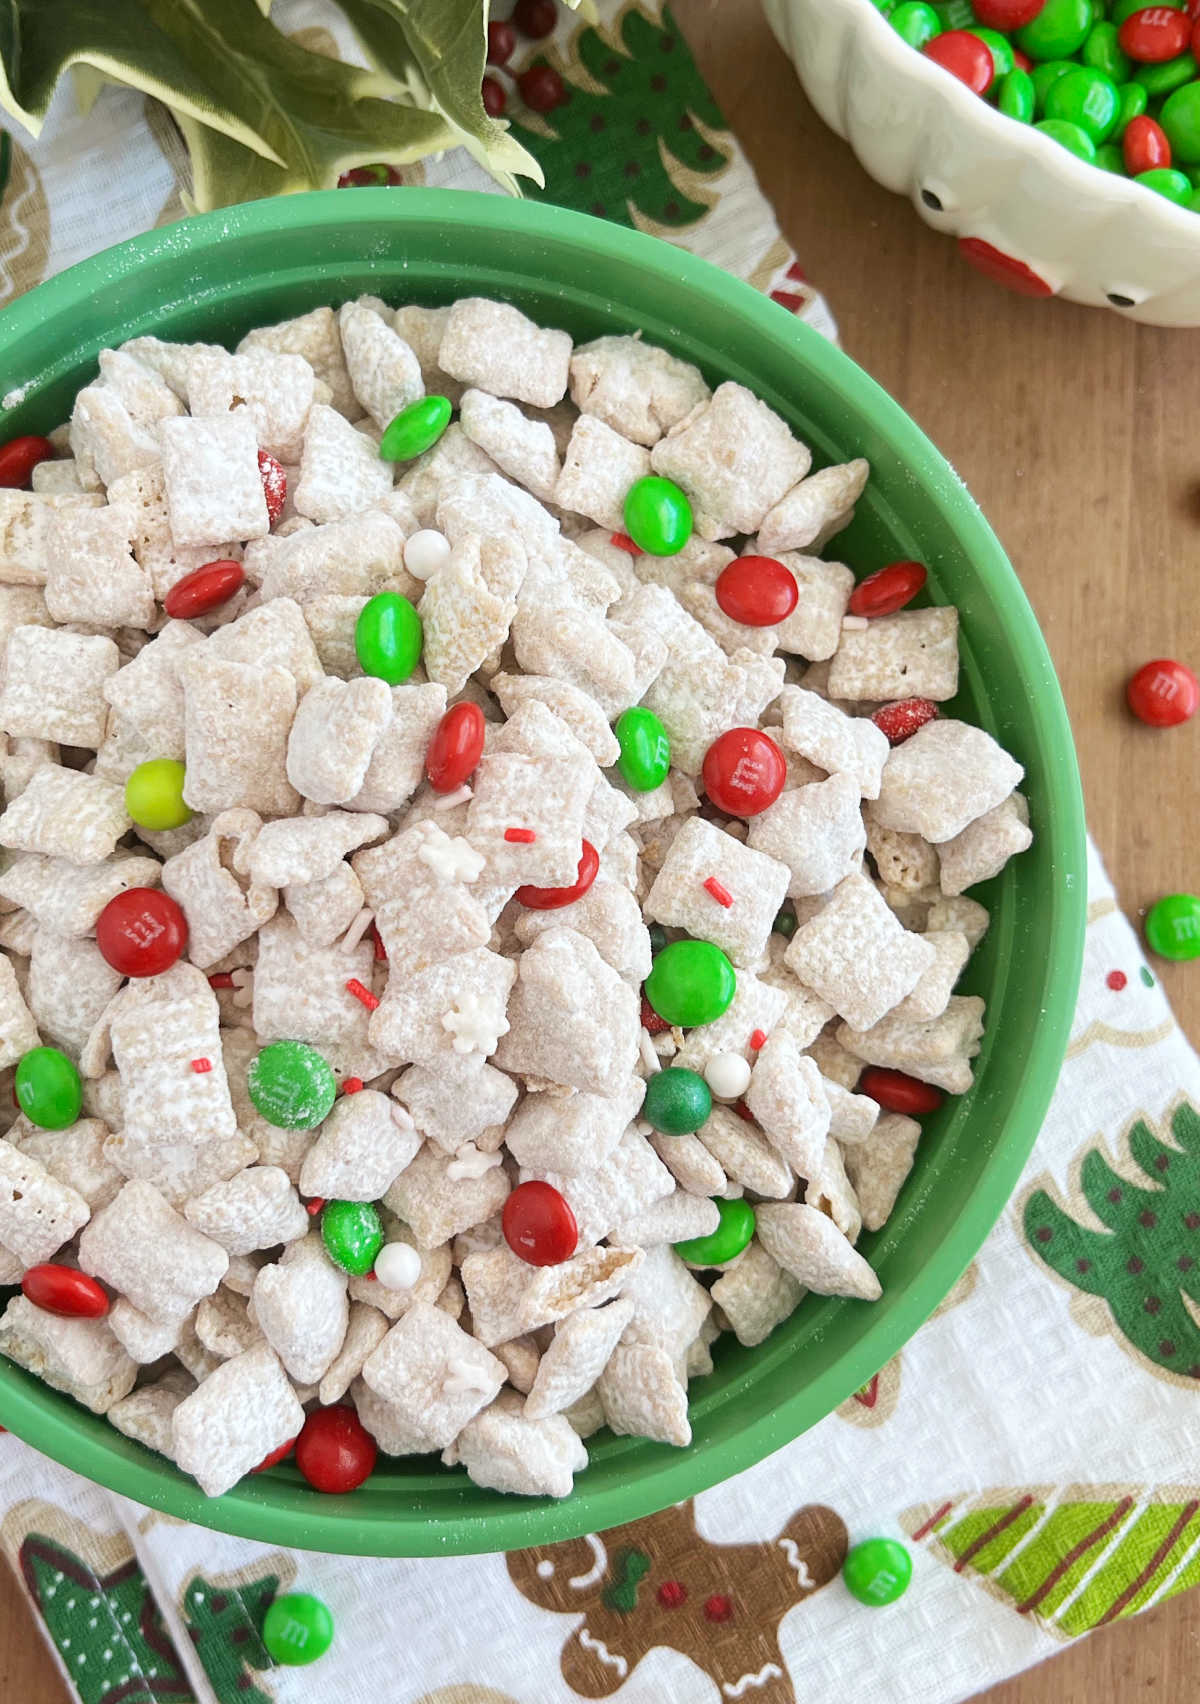 white chocolate puppy chow (muddy buddies) with red and green candy in bowl